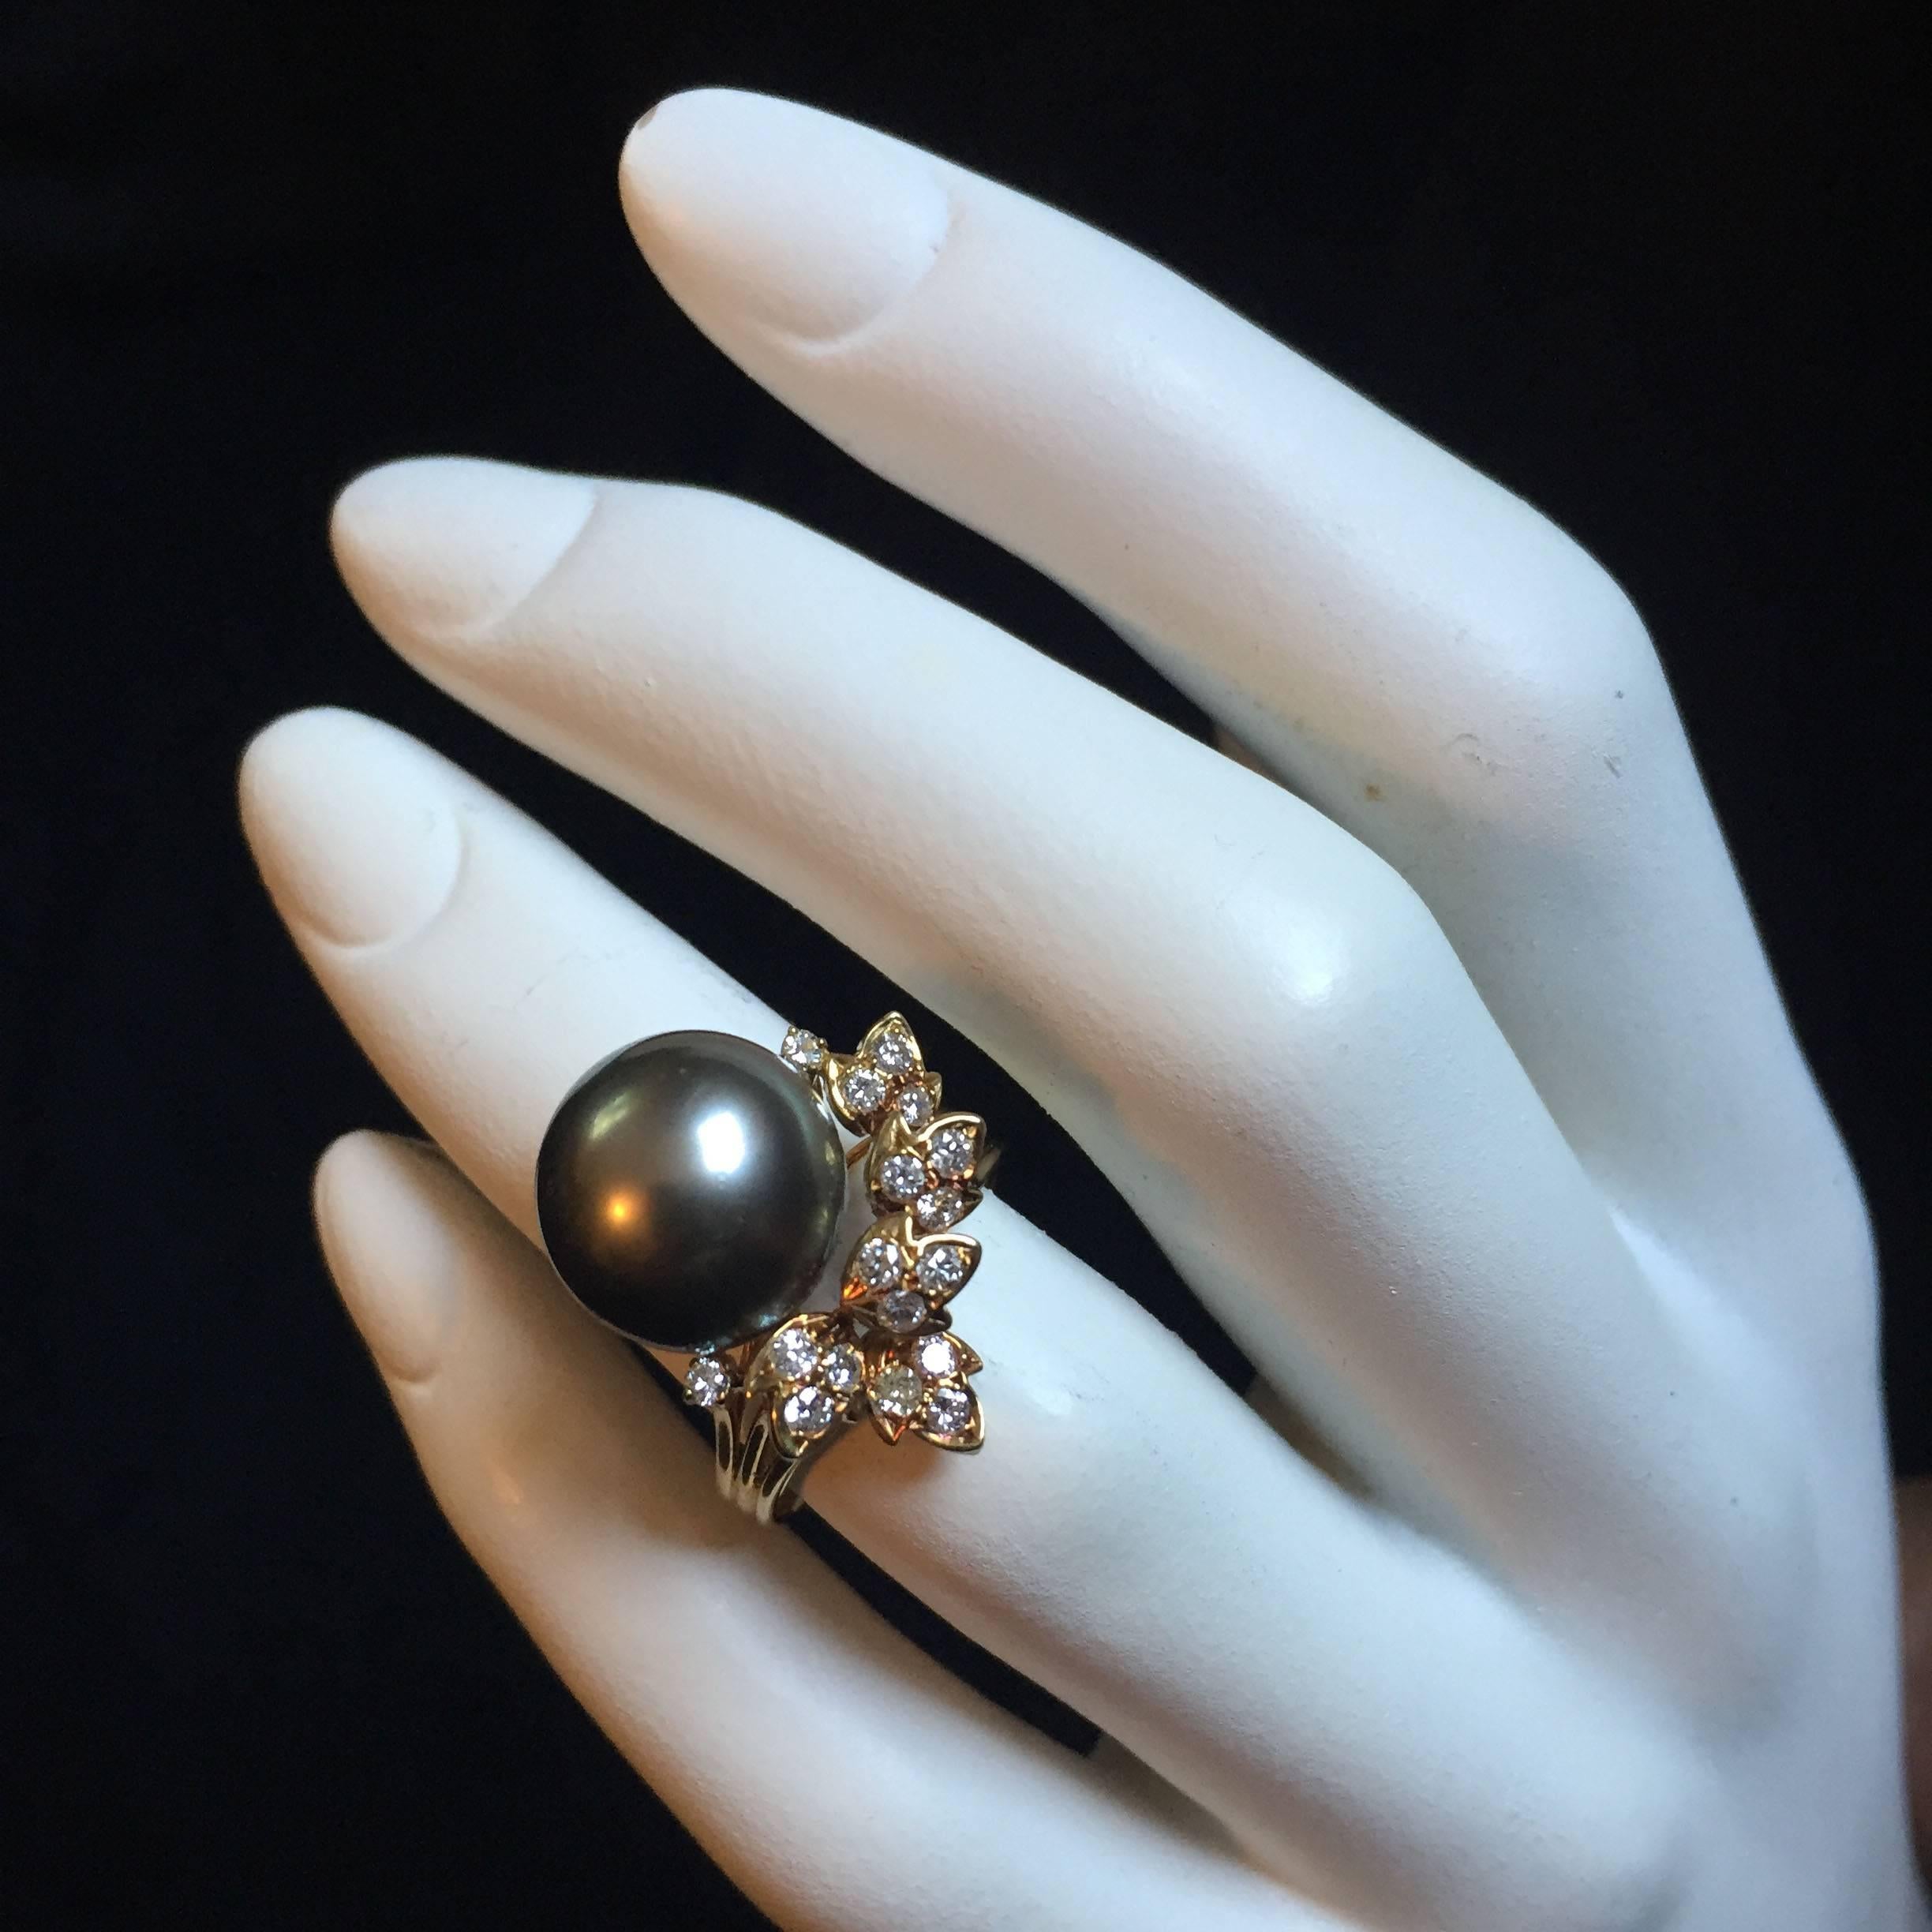 11MM South Sea Black Pearl 18K Gold Diamond Ring For Sale 3